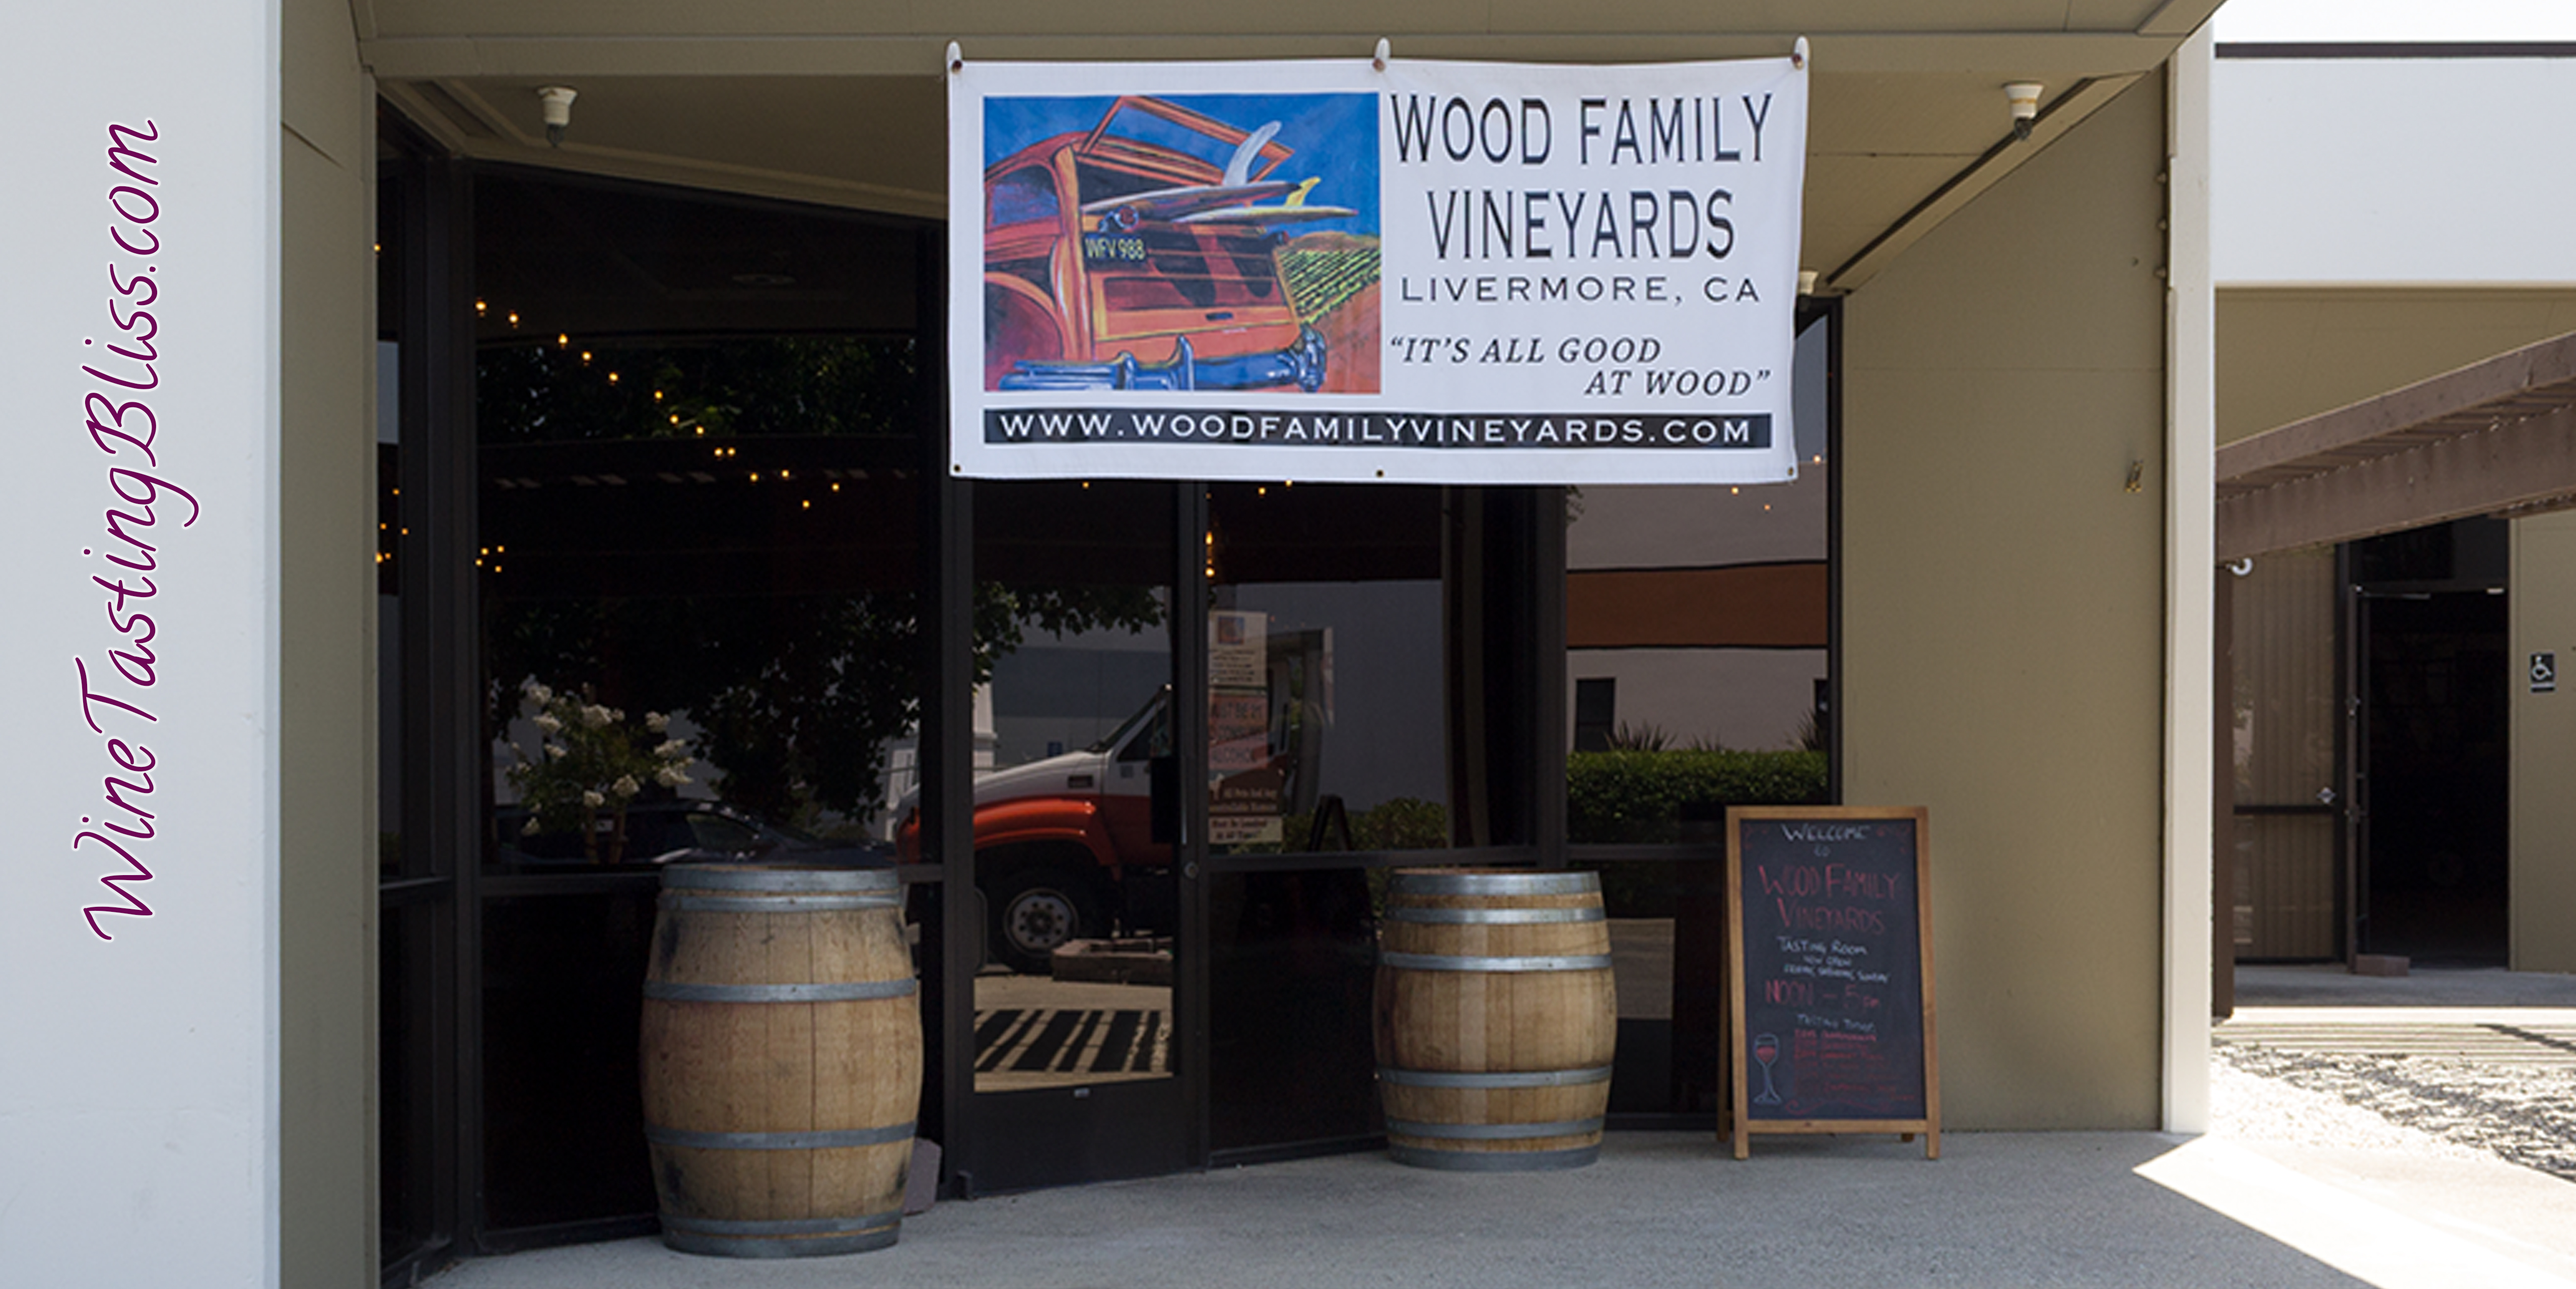 Wood Family Vineyards Opens a New Tasting Room